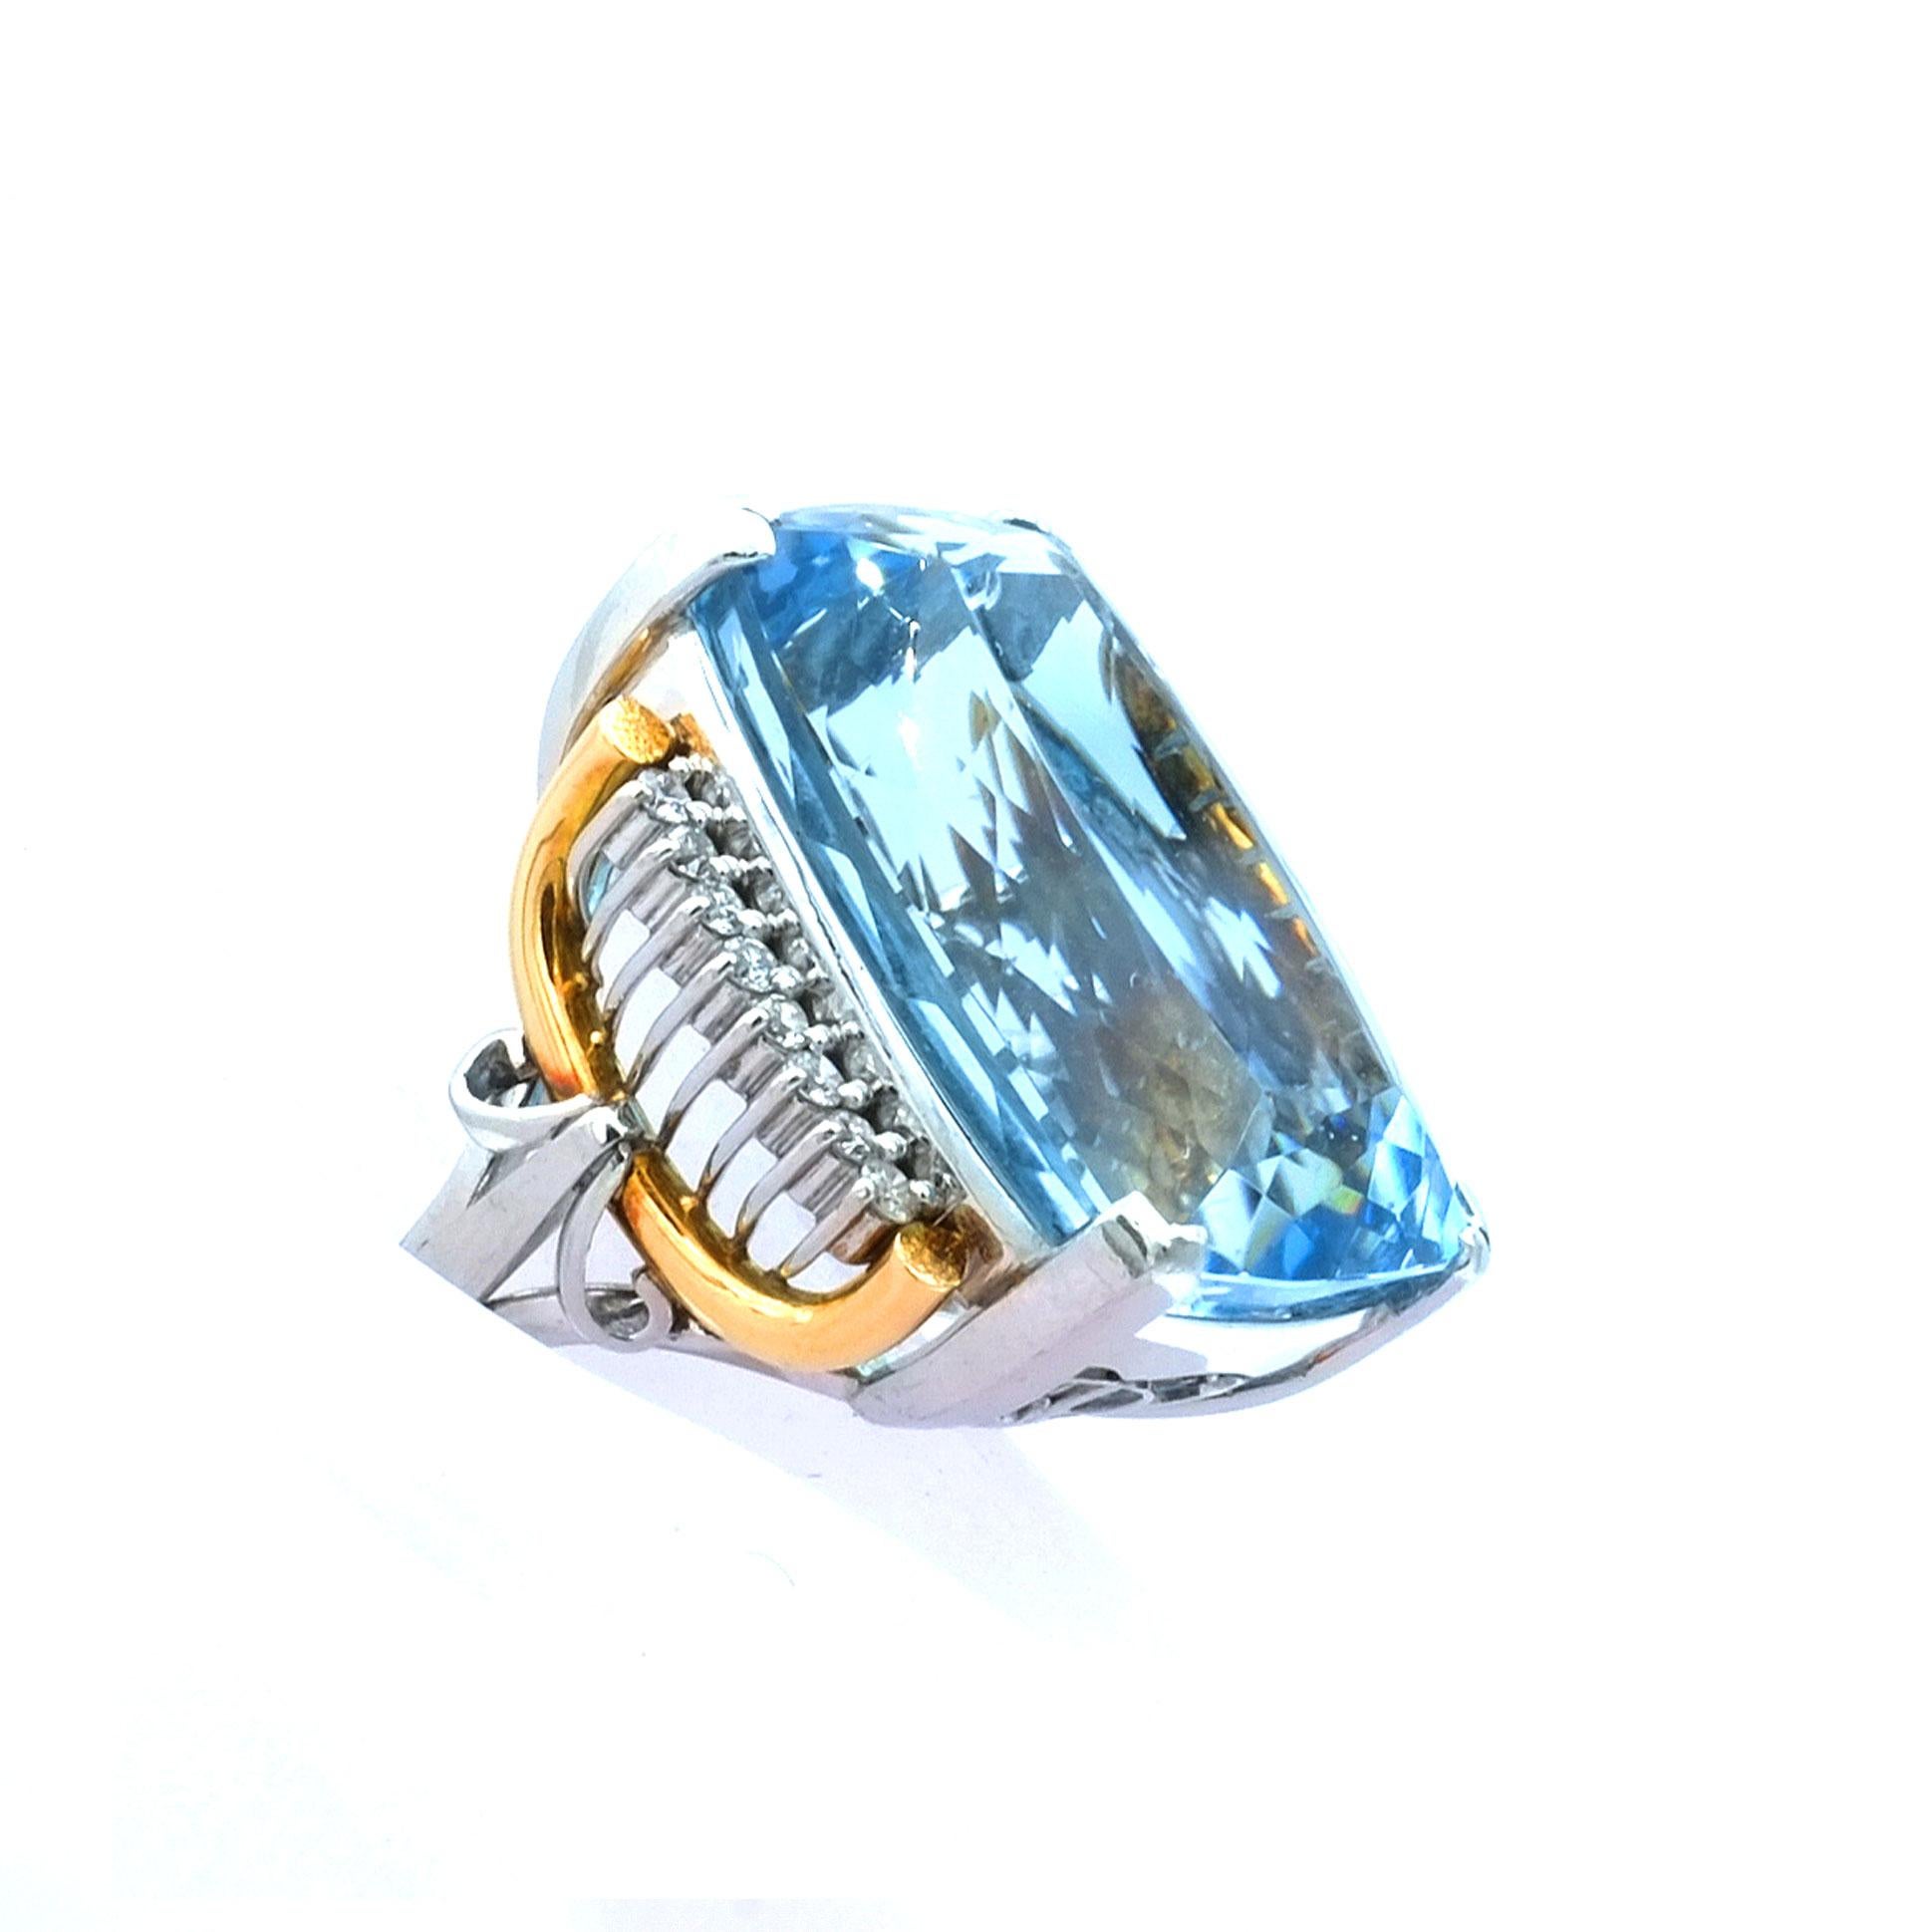 Baguette Cut Certified 58 ct Blue Topaz Diamond Platinum and Gold Cocktail Ring circa 1940 For Sale